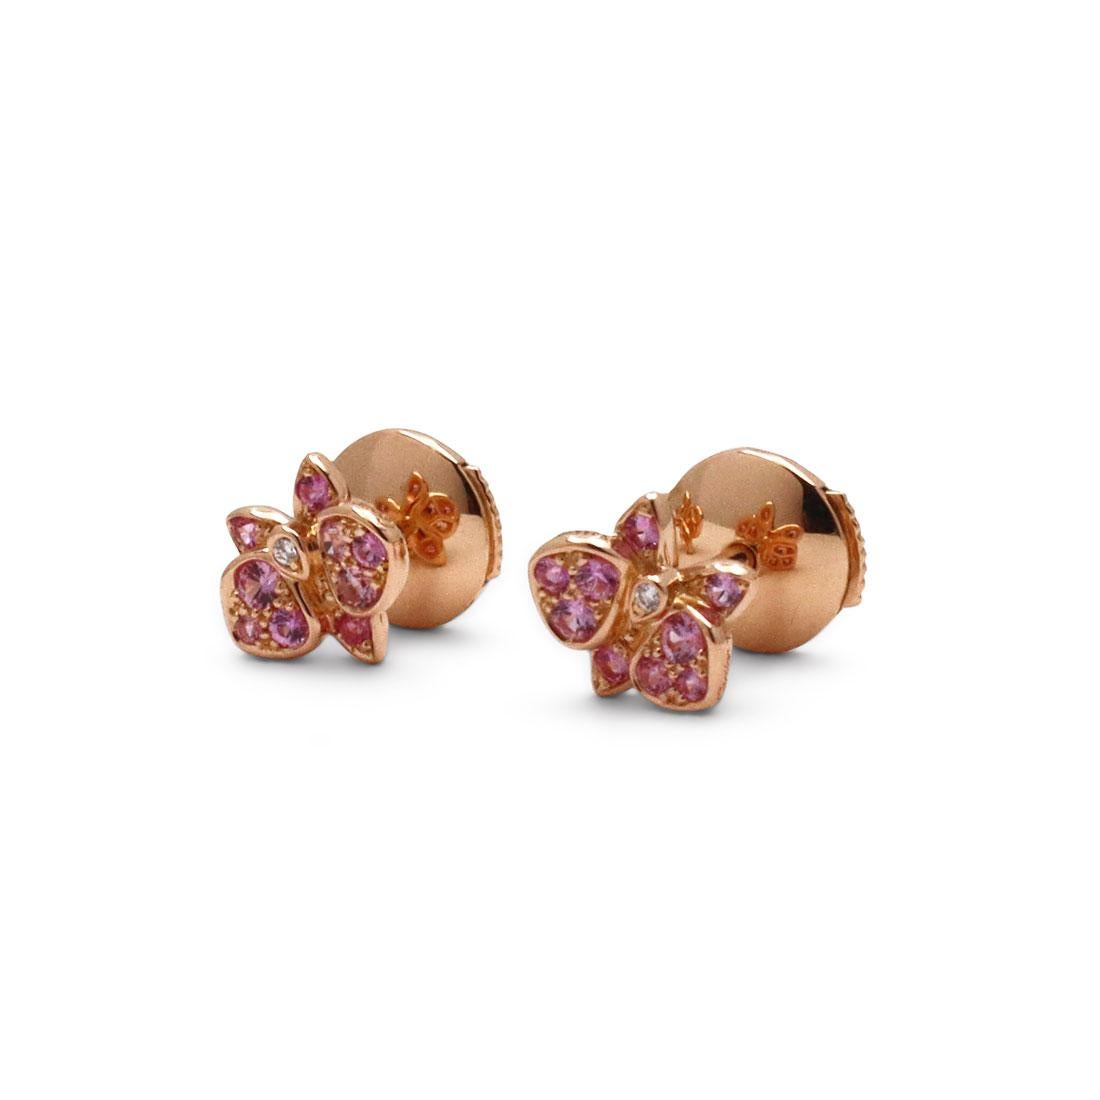 Authentic Cartier 'Caresse d'Orchidées' earrings crafted in 18 karat rose gold and features a delicate orchid-shaped motif that is embellished with pink sapphires and a center diamond. Signed Cartier, 750, with serial number and hallmarks. Earrings